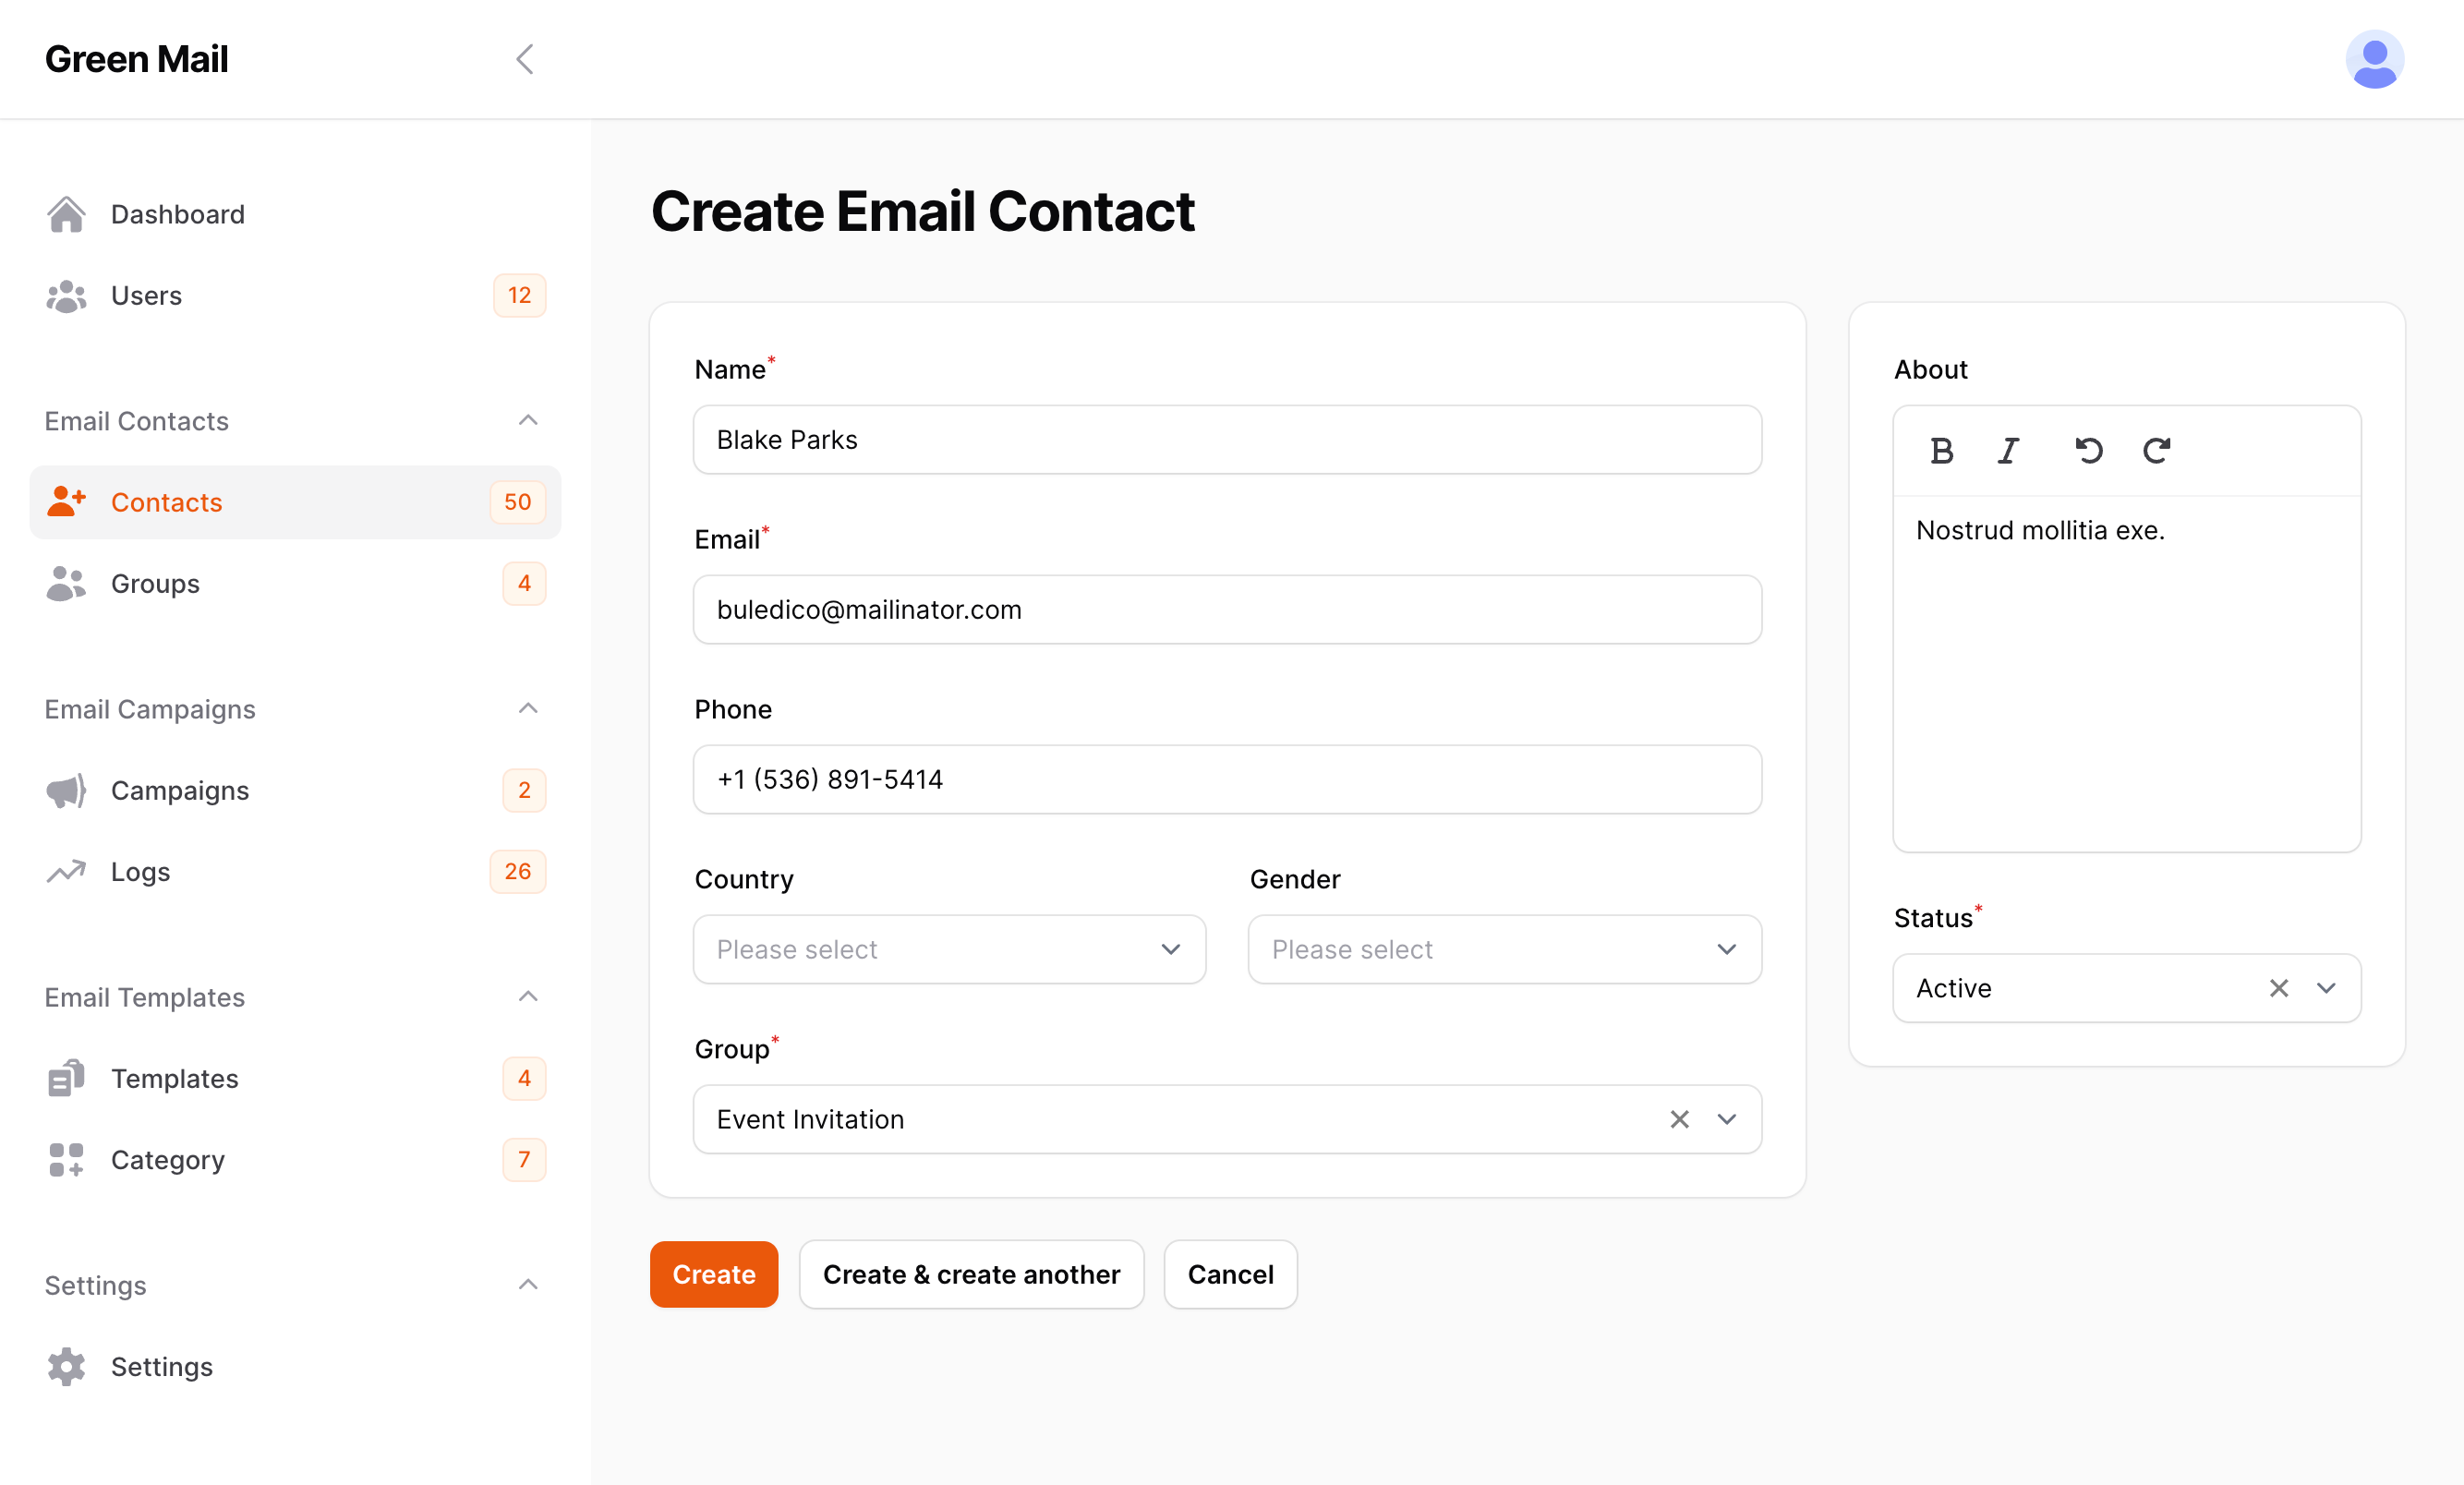 Efficiently manage your contacts for seamless email communication